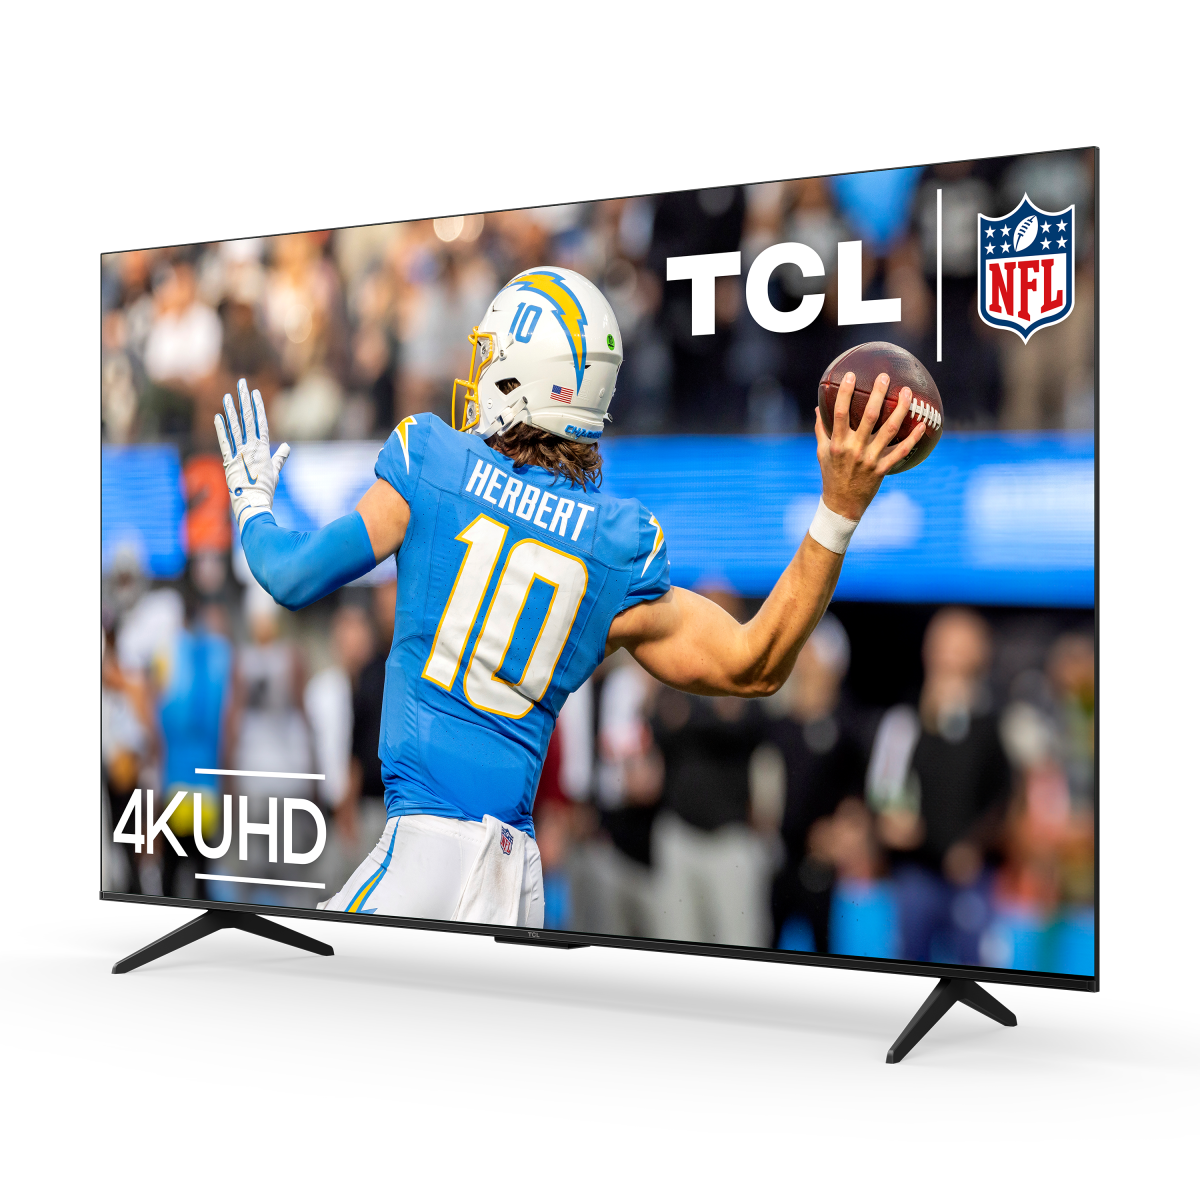 TCL S551 TV